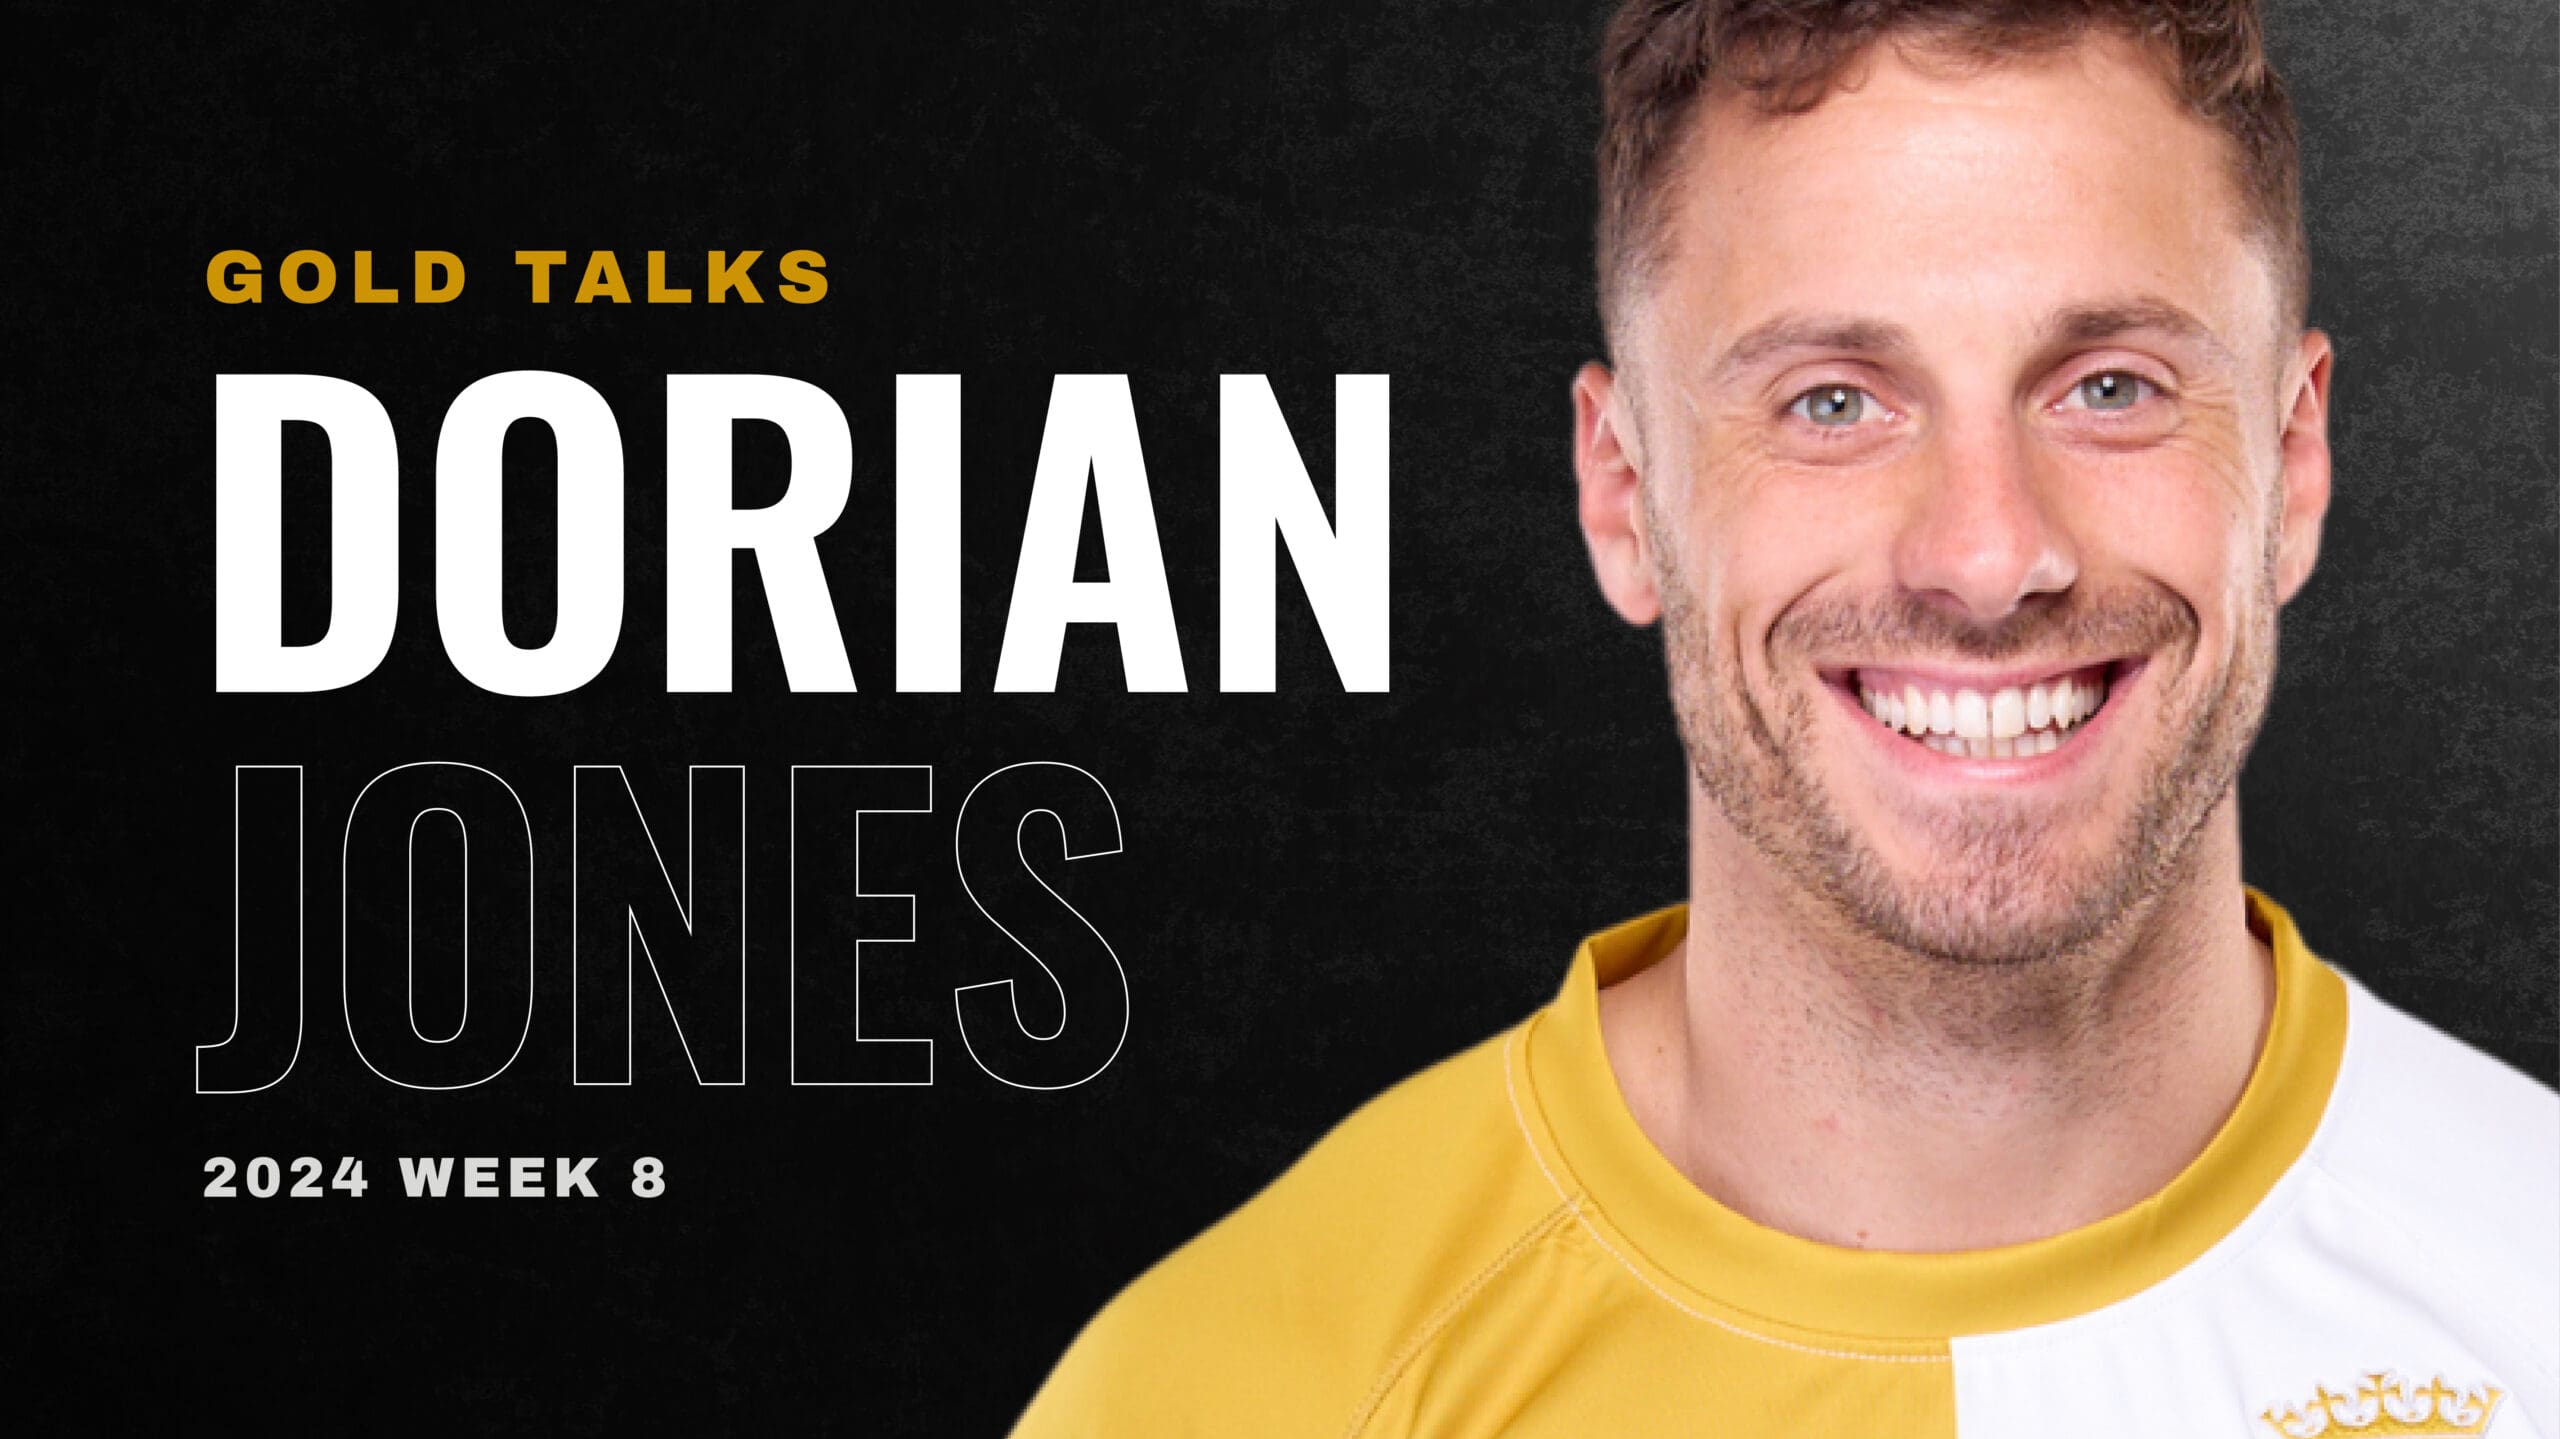 GOLD TALKS: Dorian Jones Reflects on Rugby, Life, and the Growth of the Sport in the U.S.